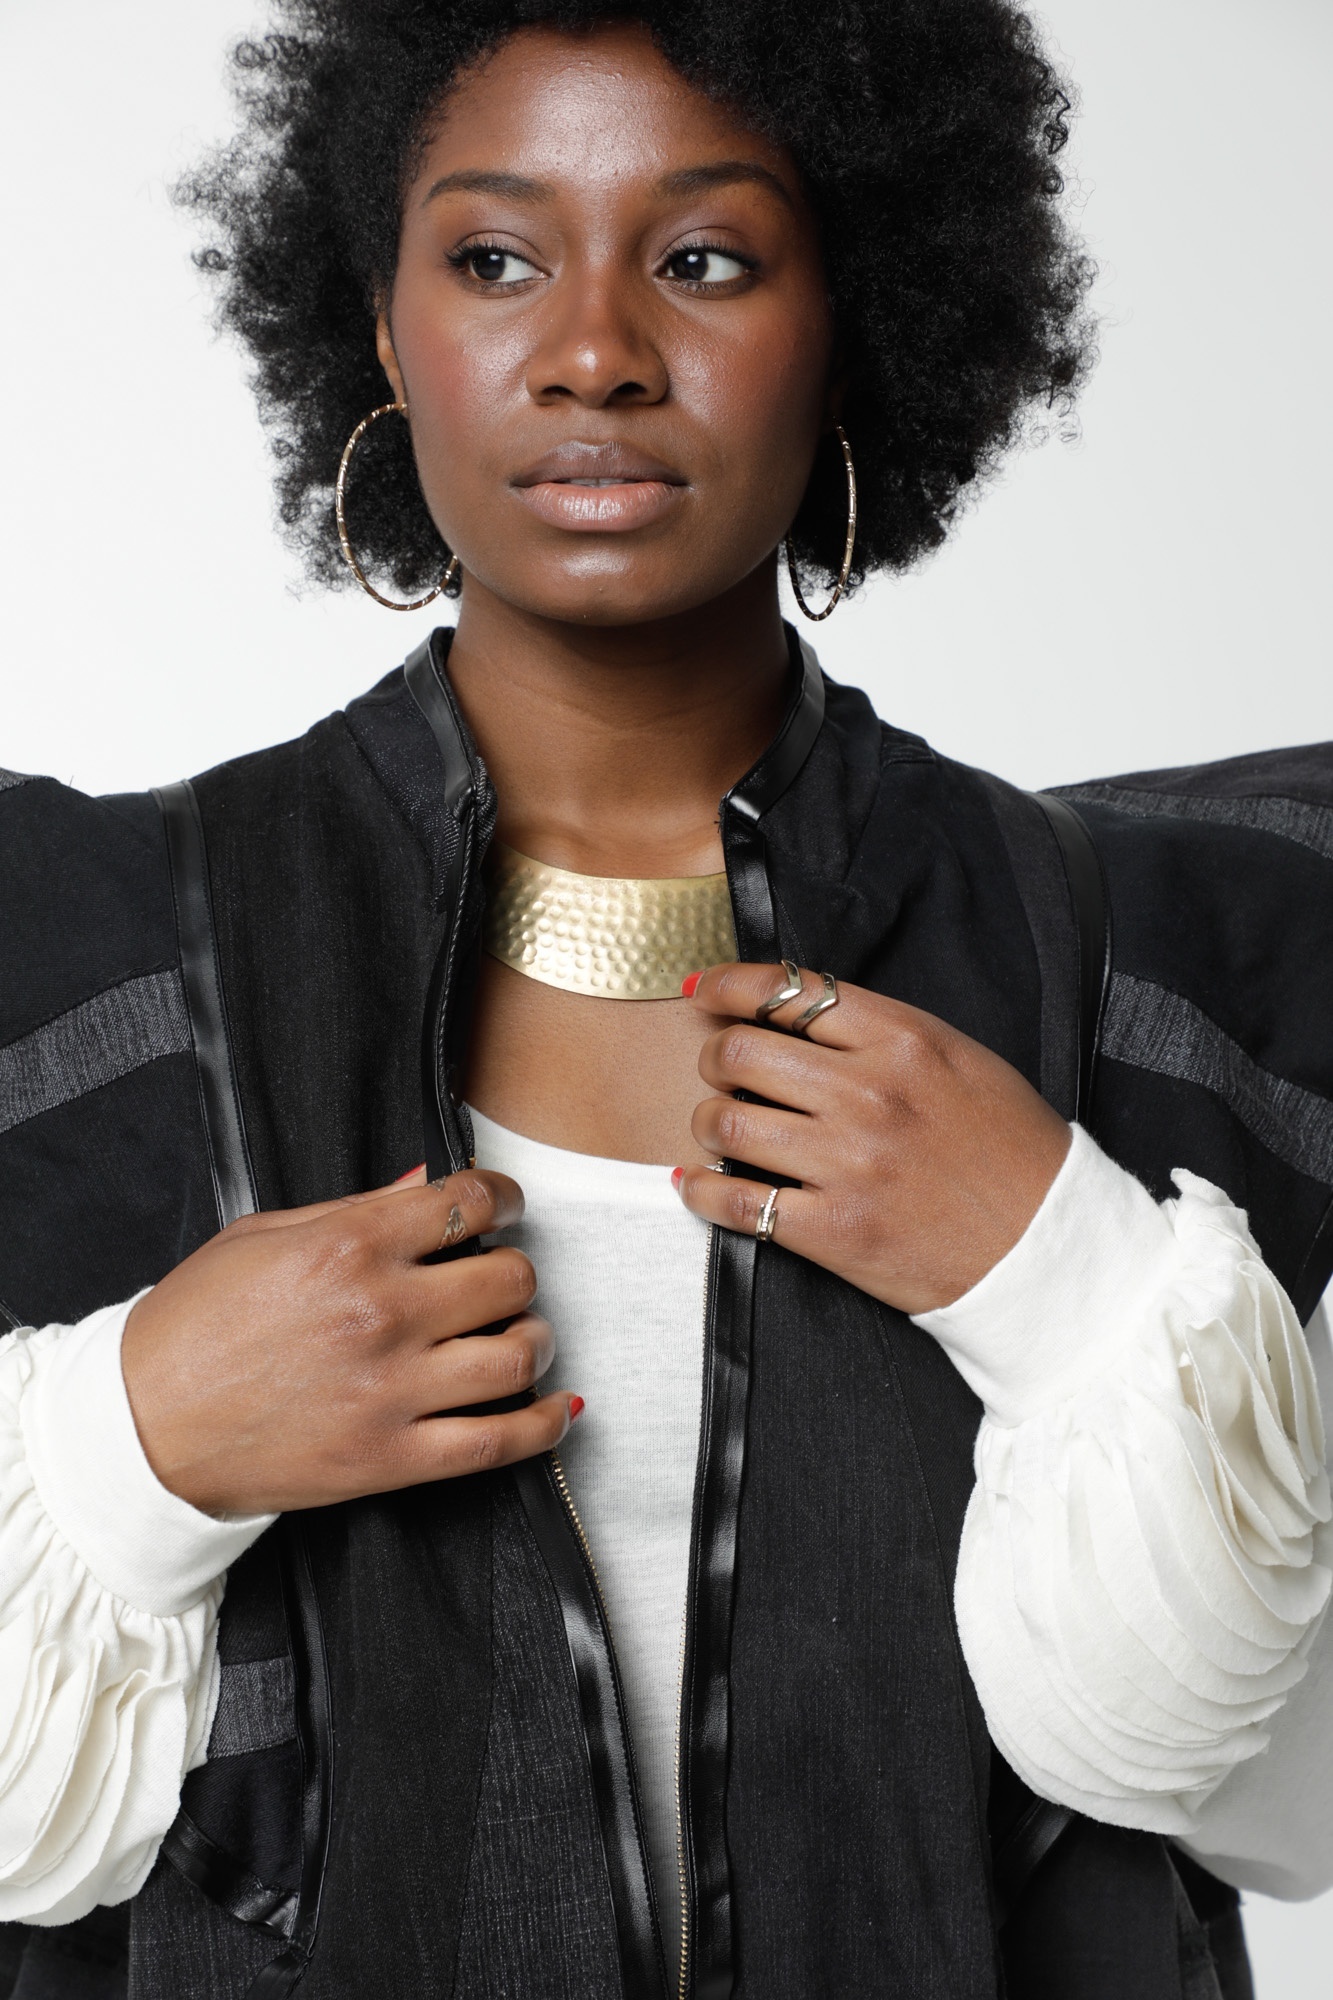 Closeup detail of a structured black jacket overlaid on a white long sleeved shirt. The jacket flares at the sleeve and the model wears a golden curved necklace.